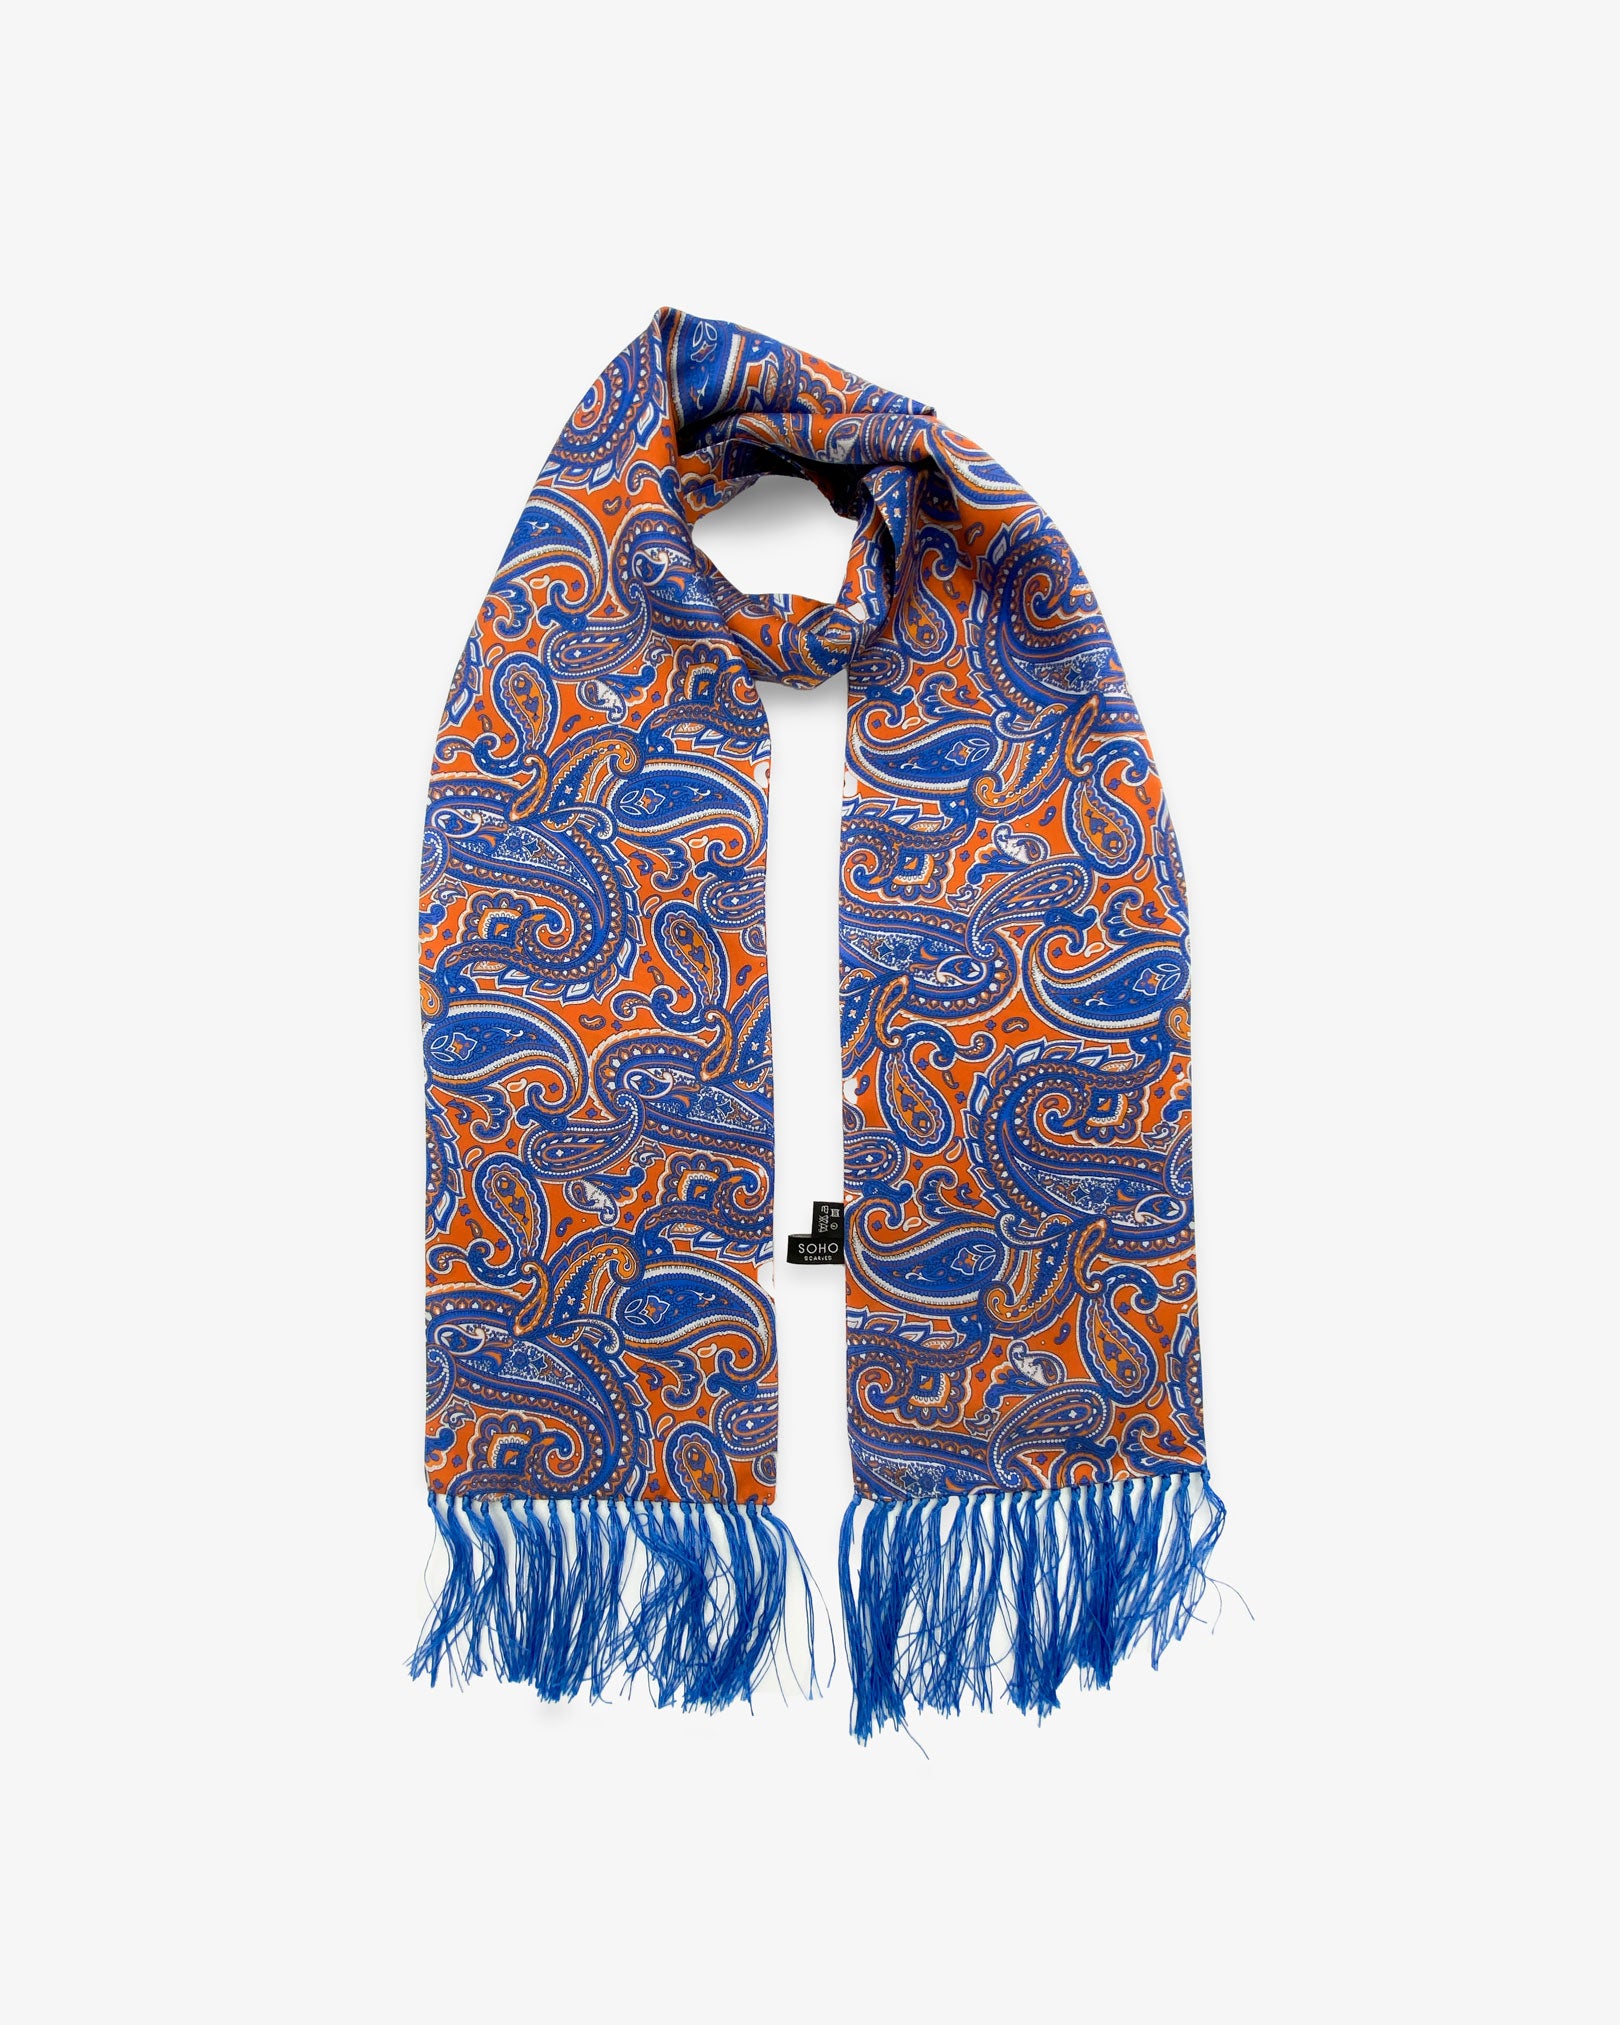 Orlando aviator scarf looped in middle with both ends parallel showing the blue and orange paisley patterns on a vibrant orange ground with clear view of 3 inch blue fringe.